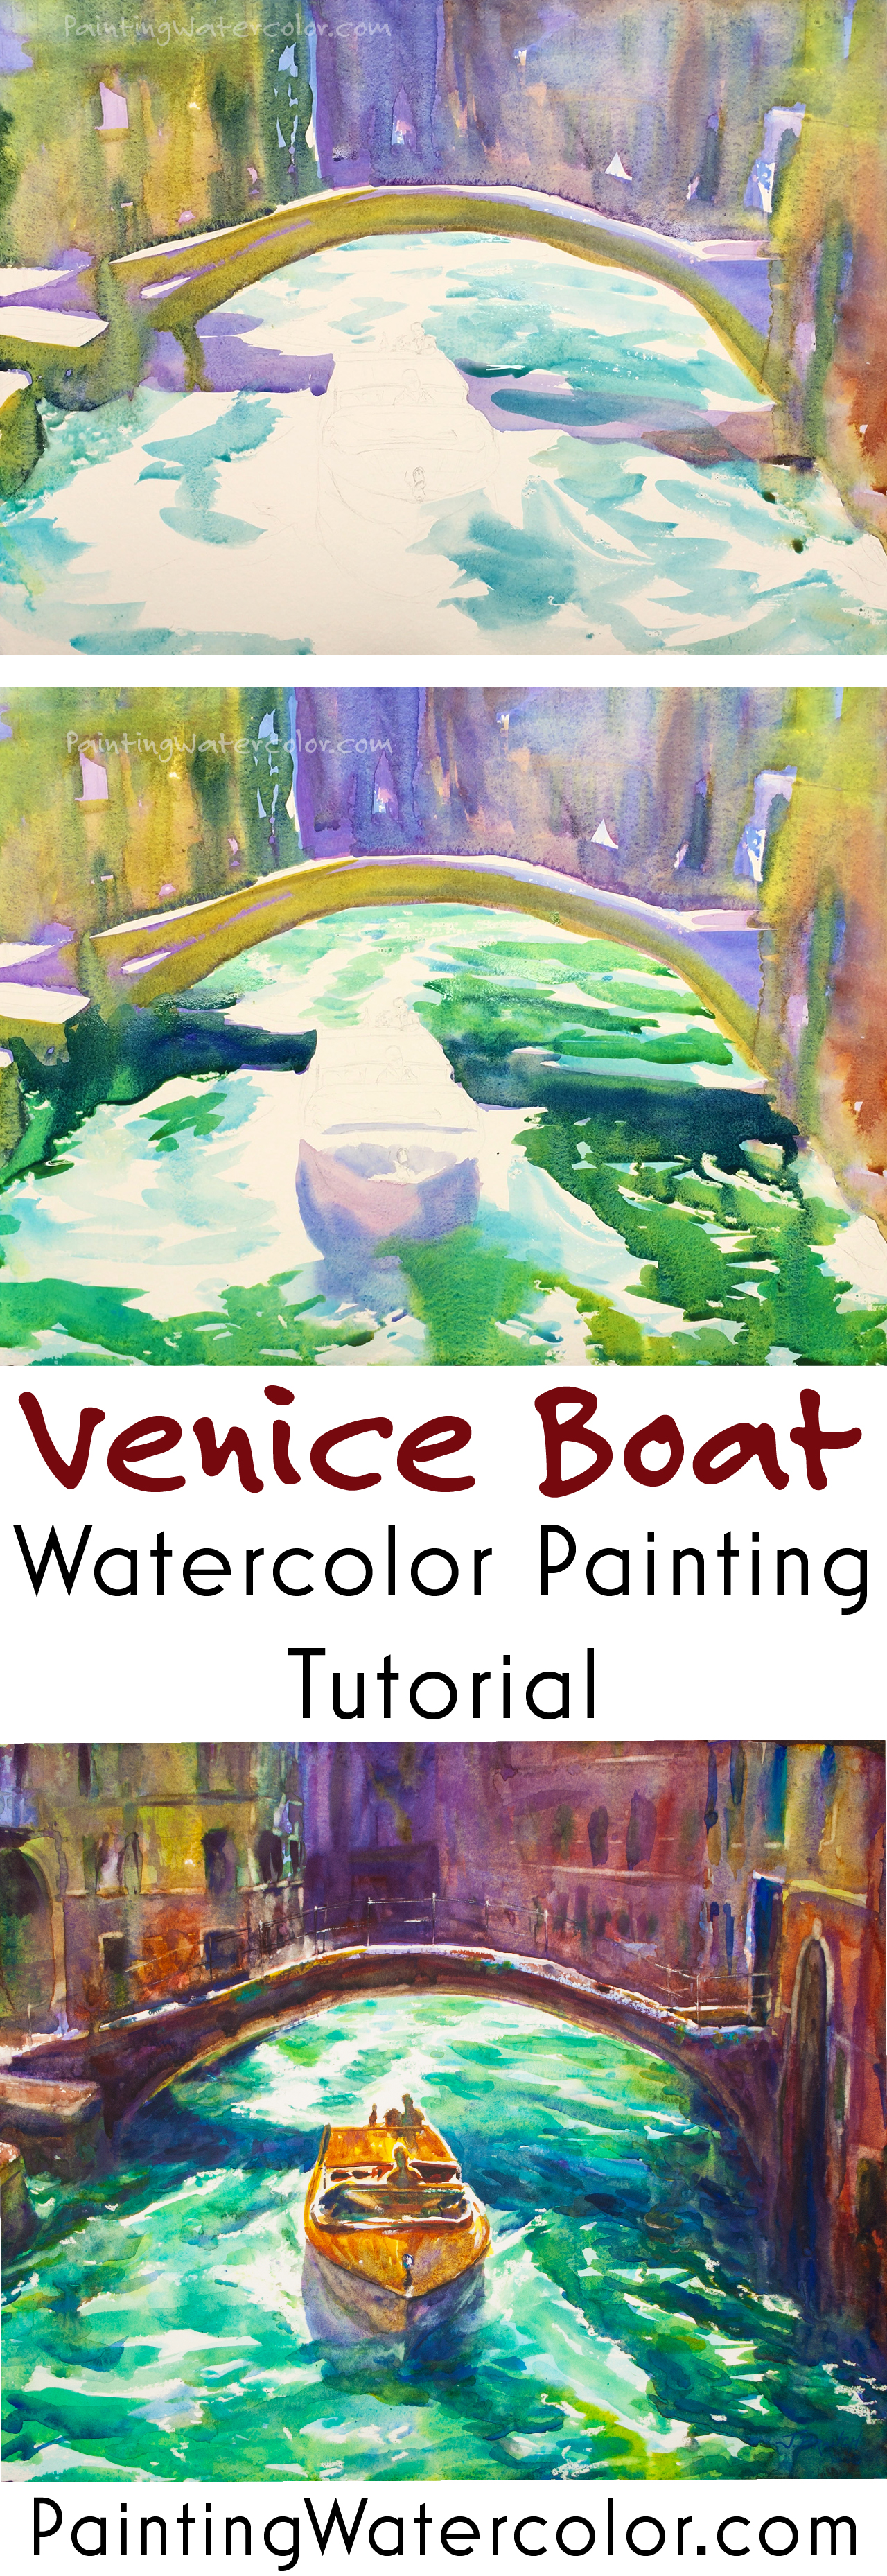 How to Paint a Venice Boat watercolor painting tutorial by Jennifer Branch